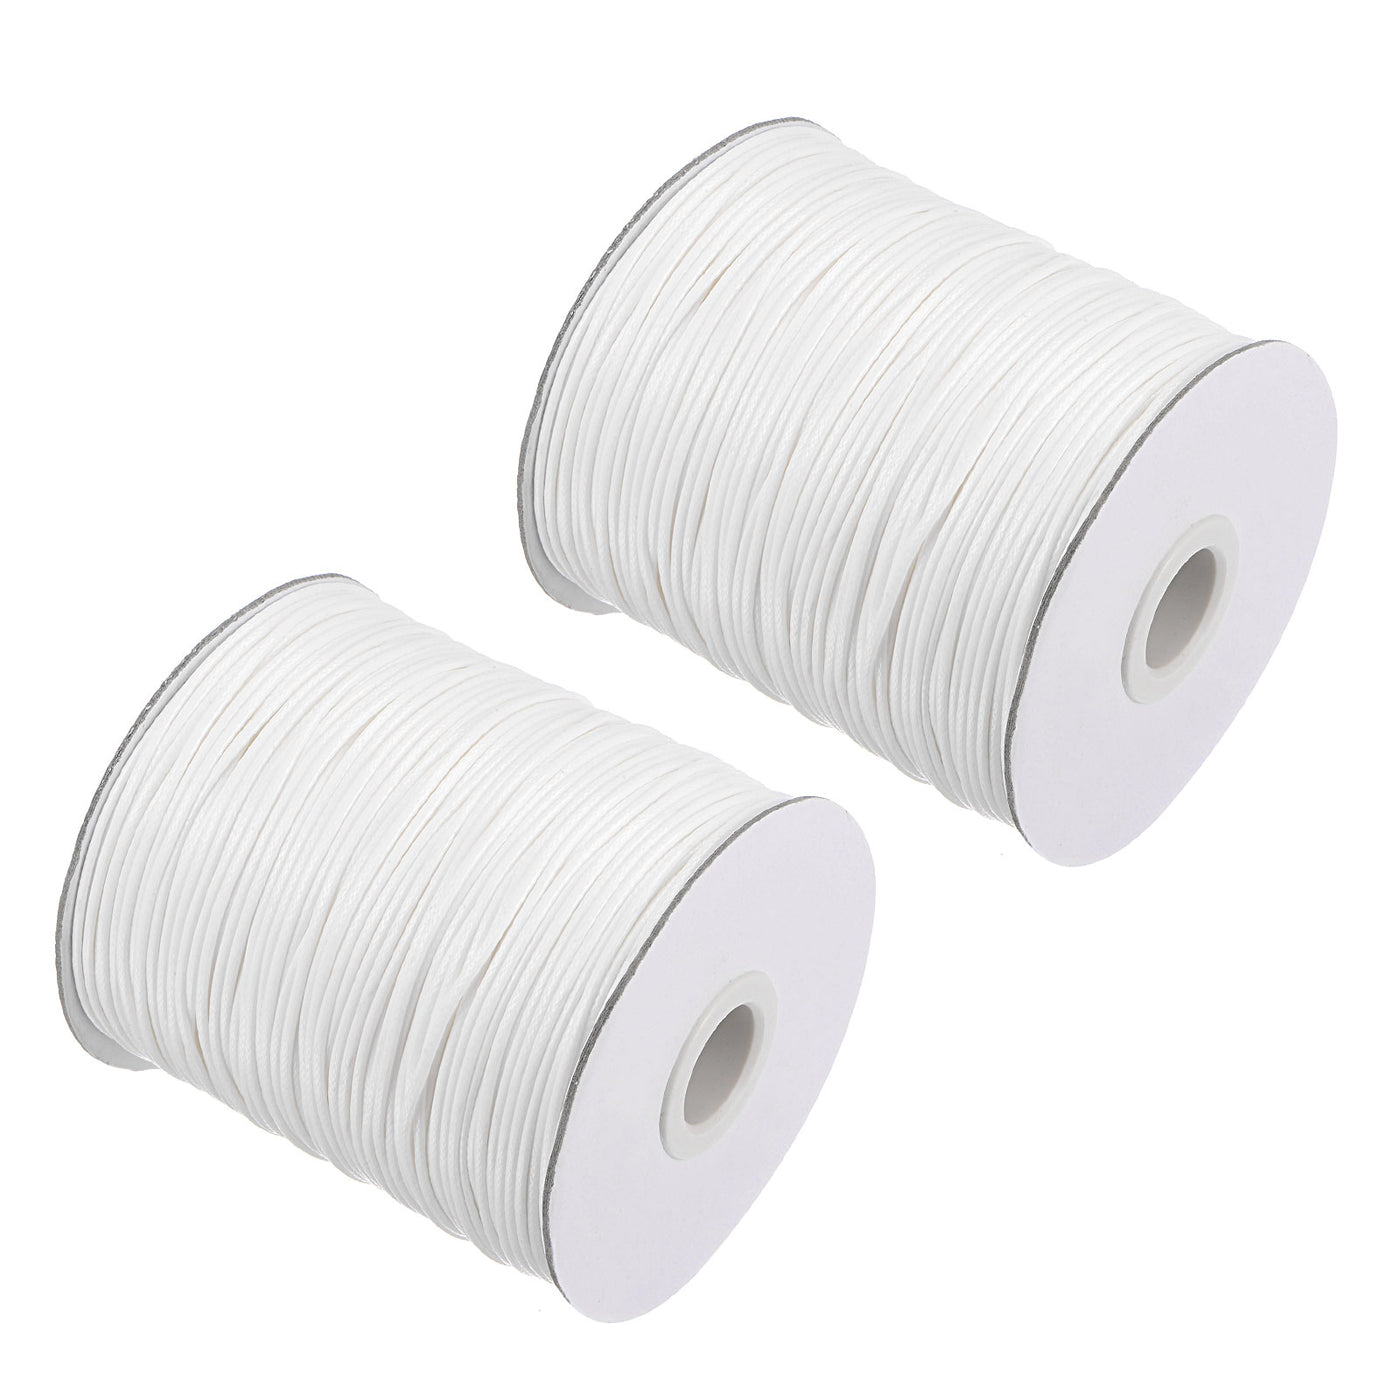 uxcell Uxcell 2pcs 1.2mm Waxed Polyester String 158M 172-Yard Beading Crafting Rope, White